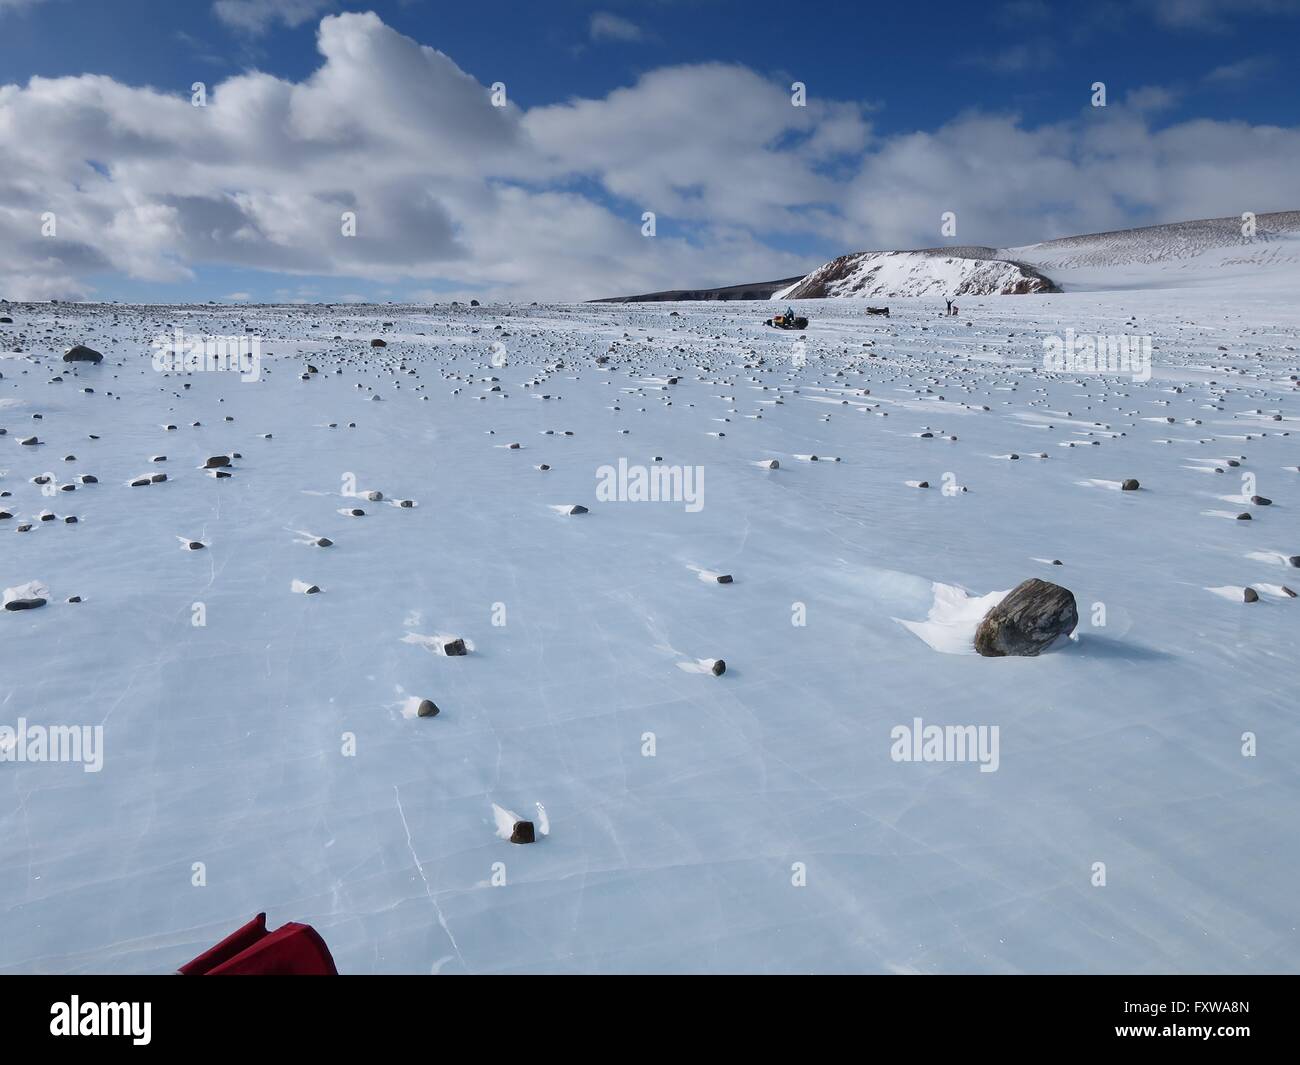 Meteorites widely scattered across a moraine on the blue ice field in the Miller Range December 19, 2015 in Antarctica. Scientists collected 570 meteorite samples during a two-month expedition as part of the Antarctic Search for Meteorites program. Stock Photo